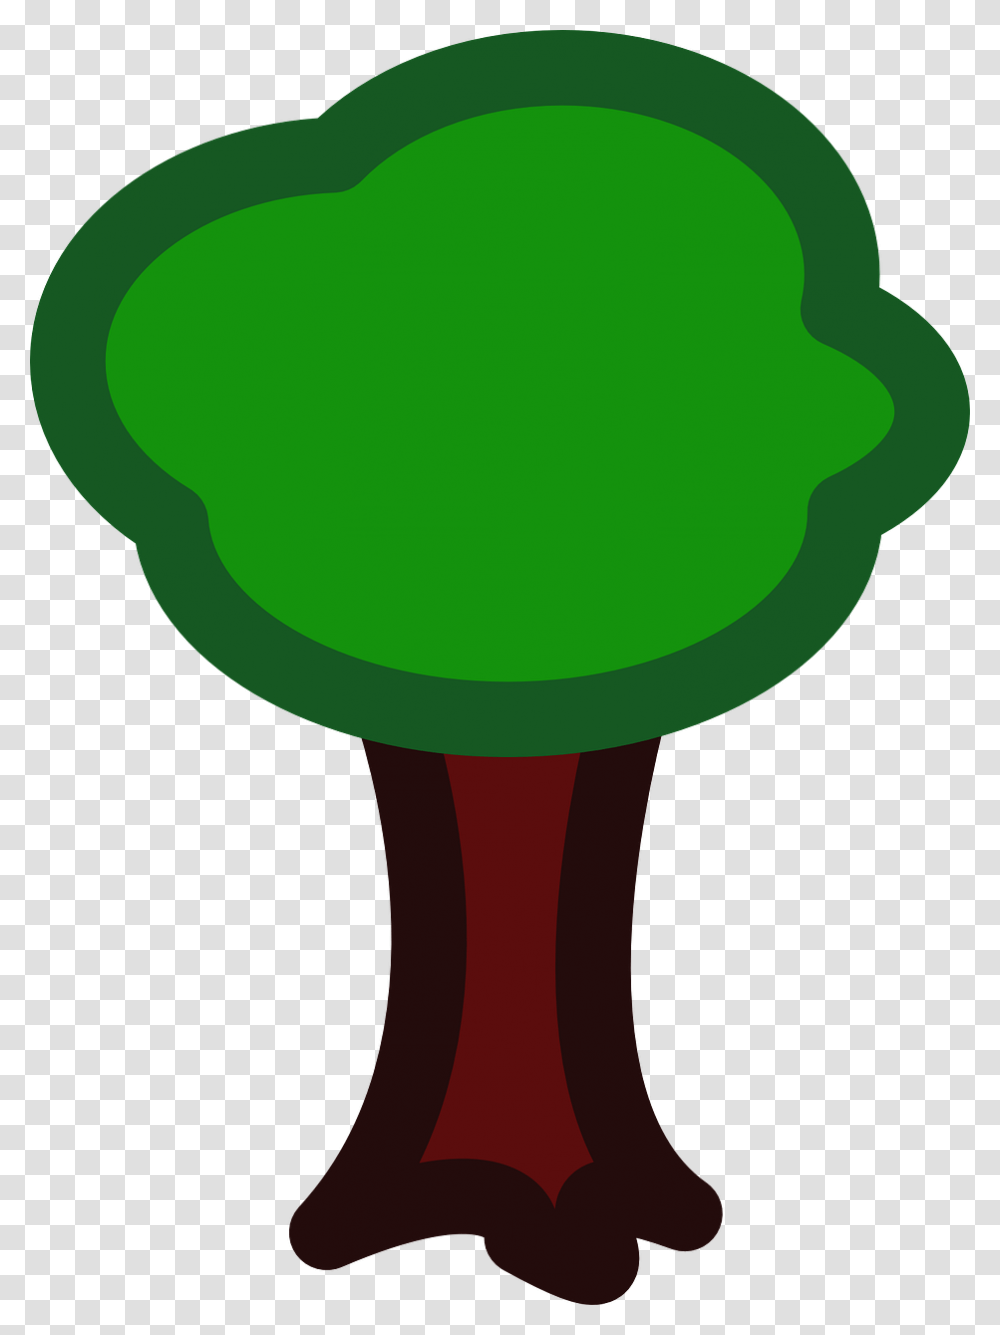 Apple Tree Forest Nature Eco Ecology Small Family Small Family Tree Clip Art, Green, Rattle, Musical Instrument Transparent Png